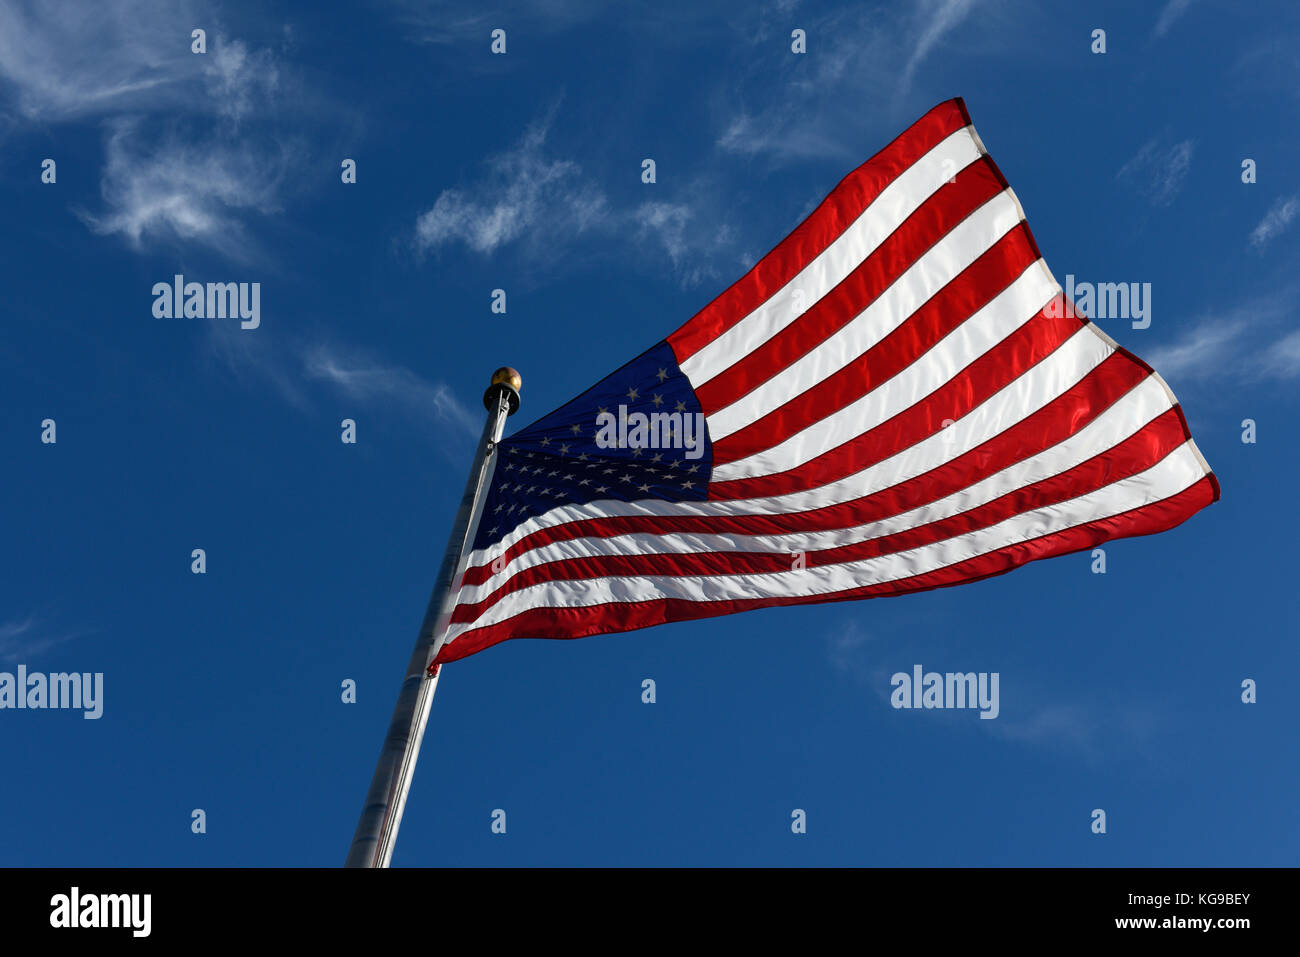 The American Flag Flying, Stars and Stripes,  United states of America Flag Blue sky. The Star-Spangled Banner USA Flag blowing in the wind. Stock Photo